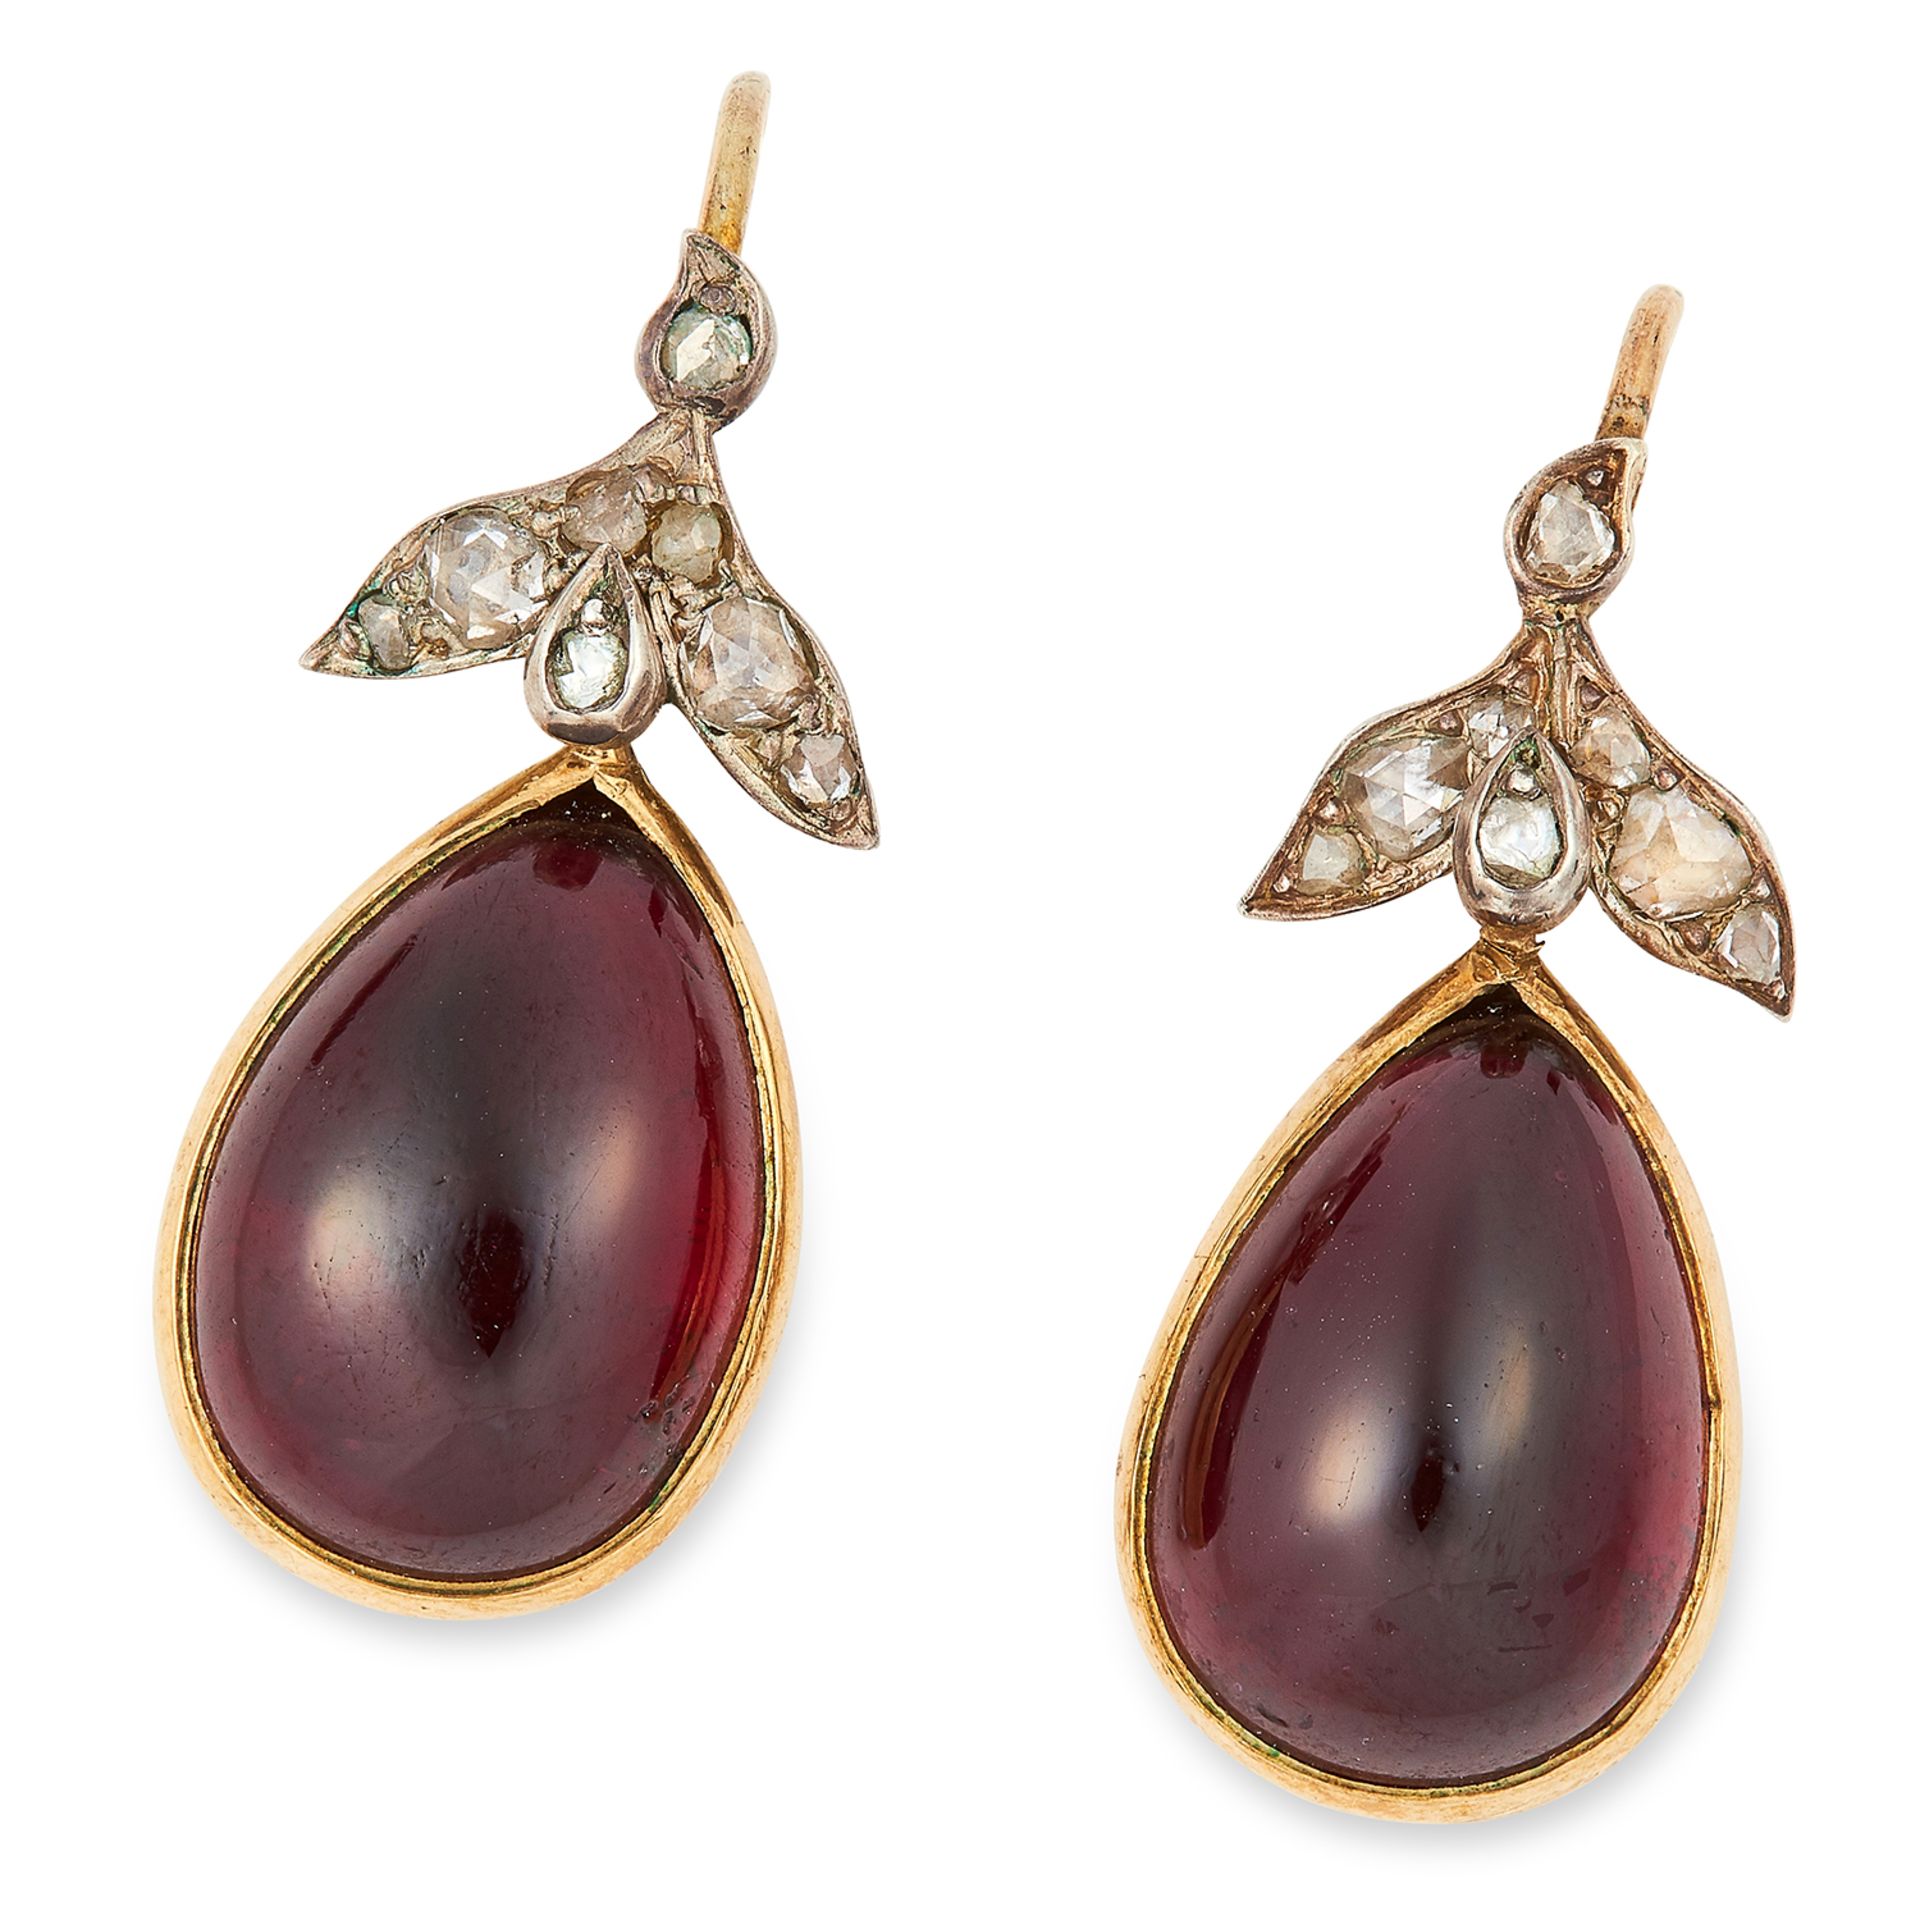 ANTIQUE VICTORIAN GARNET AND DIAMOND EARRINGS each set with cabochon garnet and rose cut diamonds,